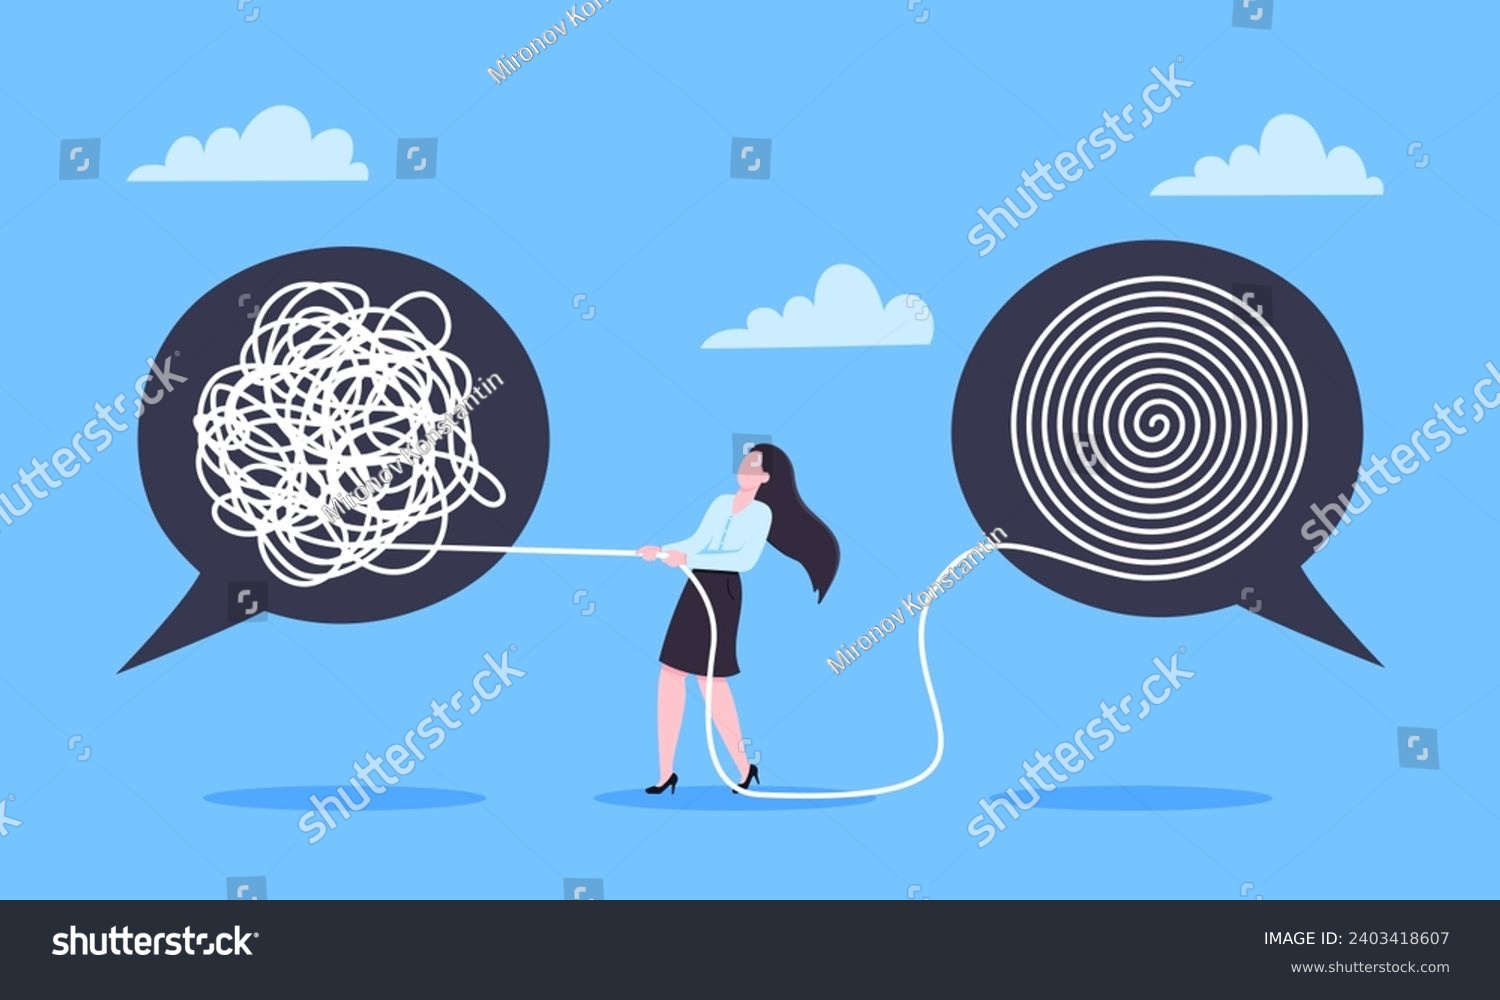 Unravel business chaos process with tangle difficult problem mess business concept flat style design vector illustration. Chaos to order, complex to simple metaphor with person trying solve mess cable #2403418607